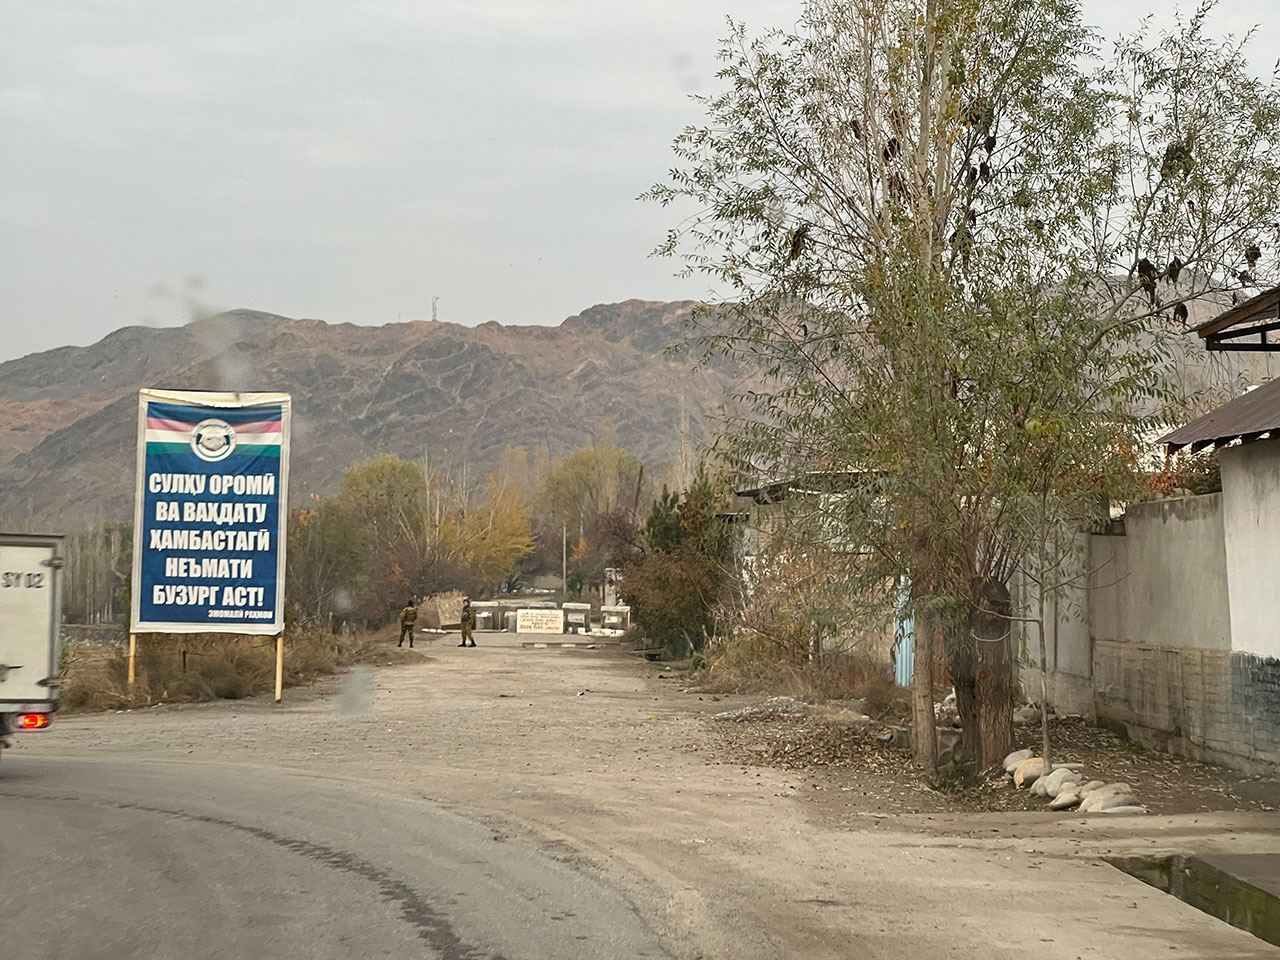 The de-facto border point separating the Tajik village of Chorbog from the Kyrgyz village of Dostuk (Batken district). The border point was under the control of Kyrgyz forces when two Tajik ambulances and a car with civilians came under attack on September 16, 2022.